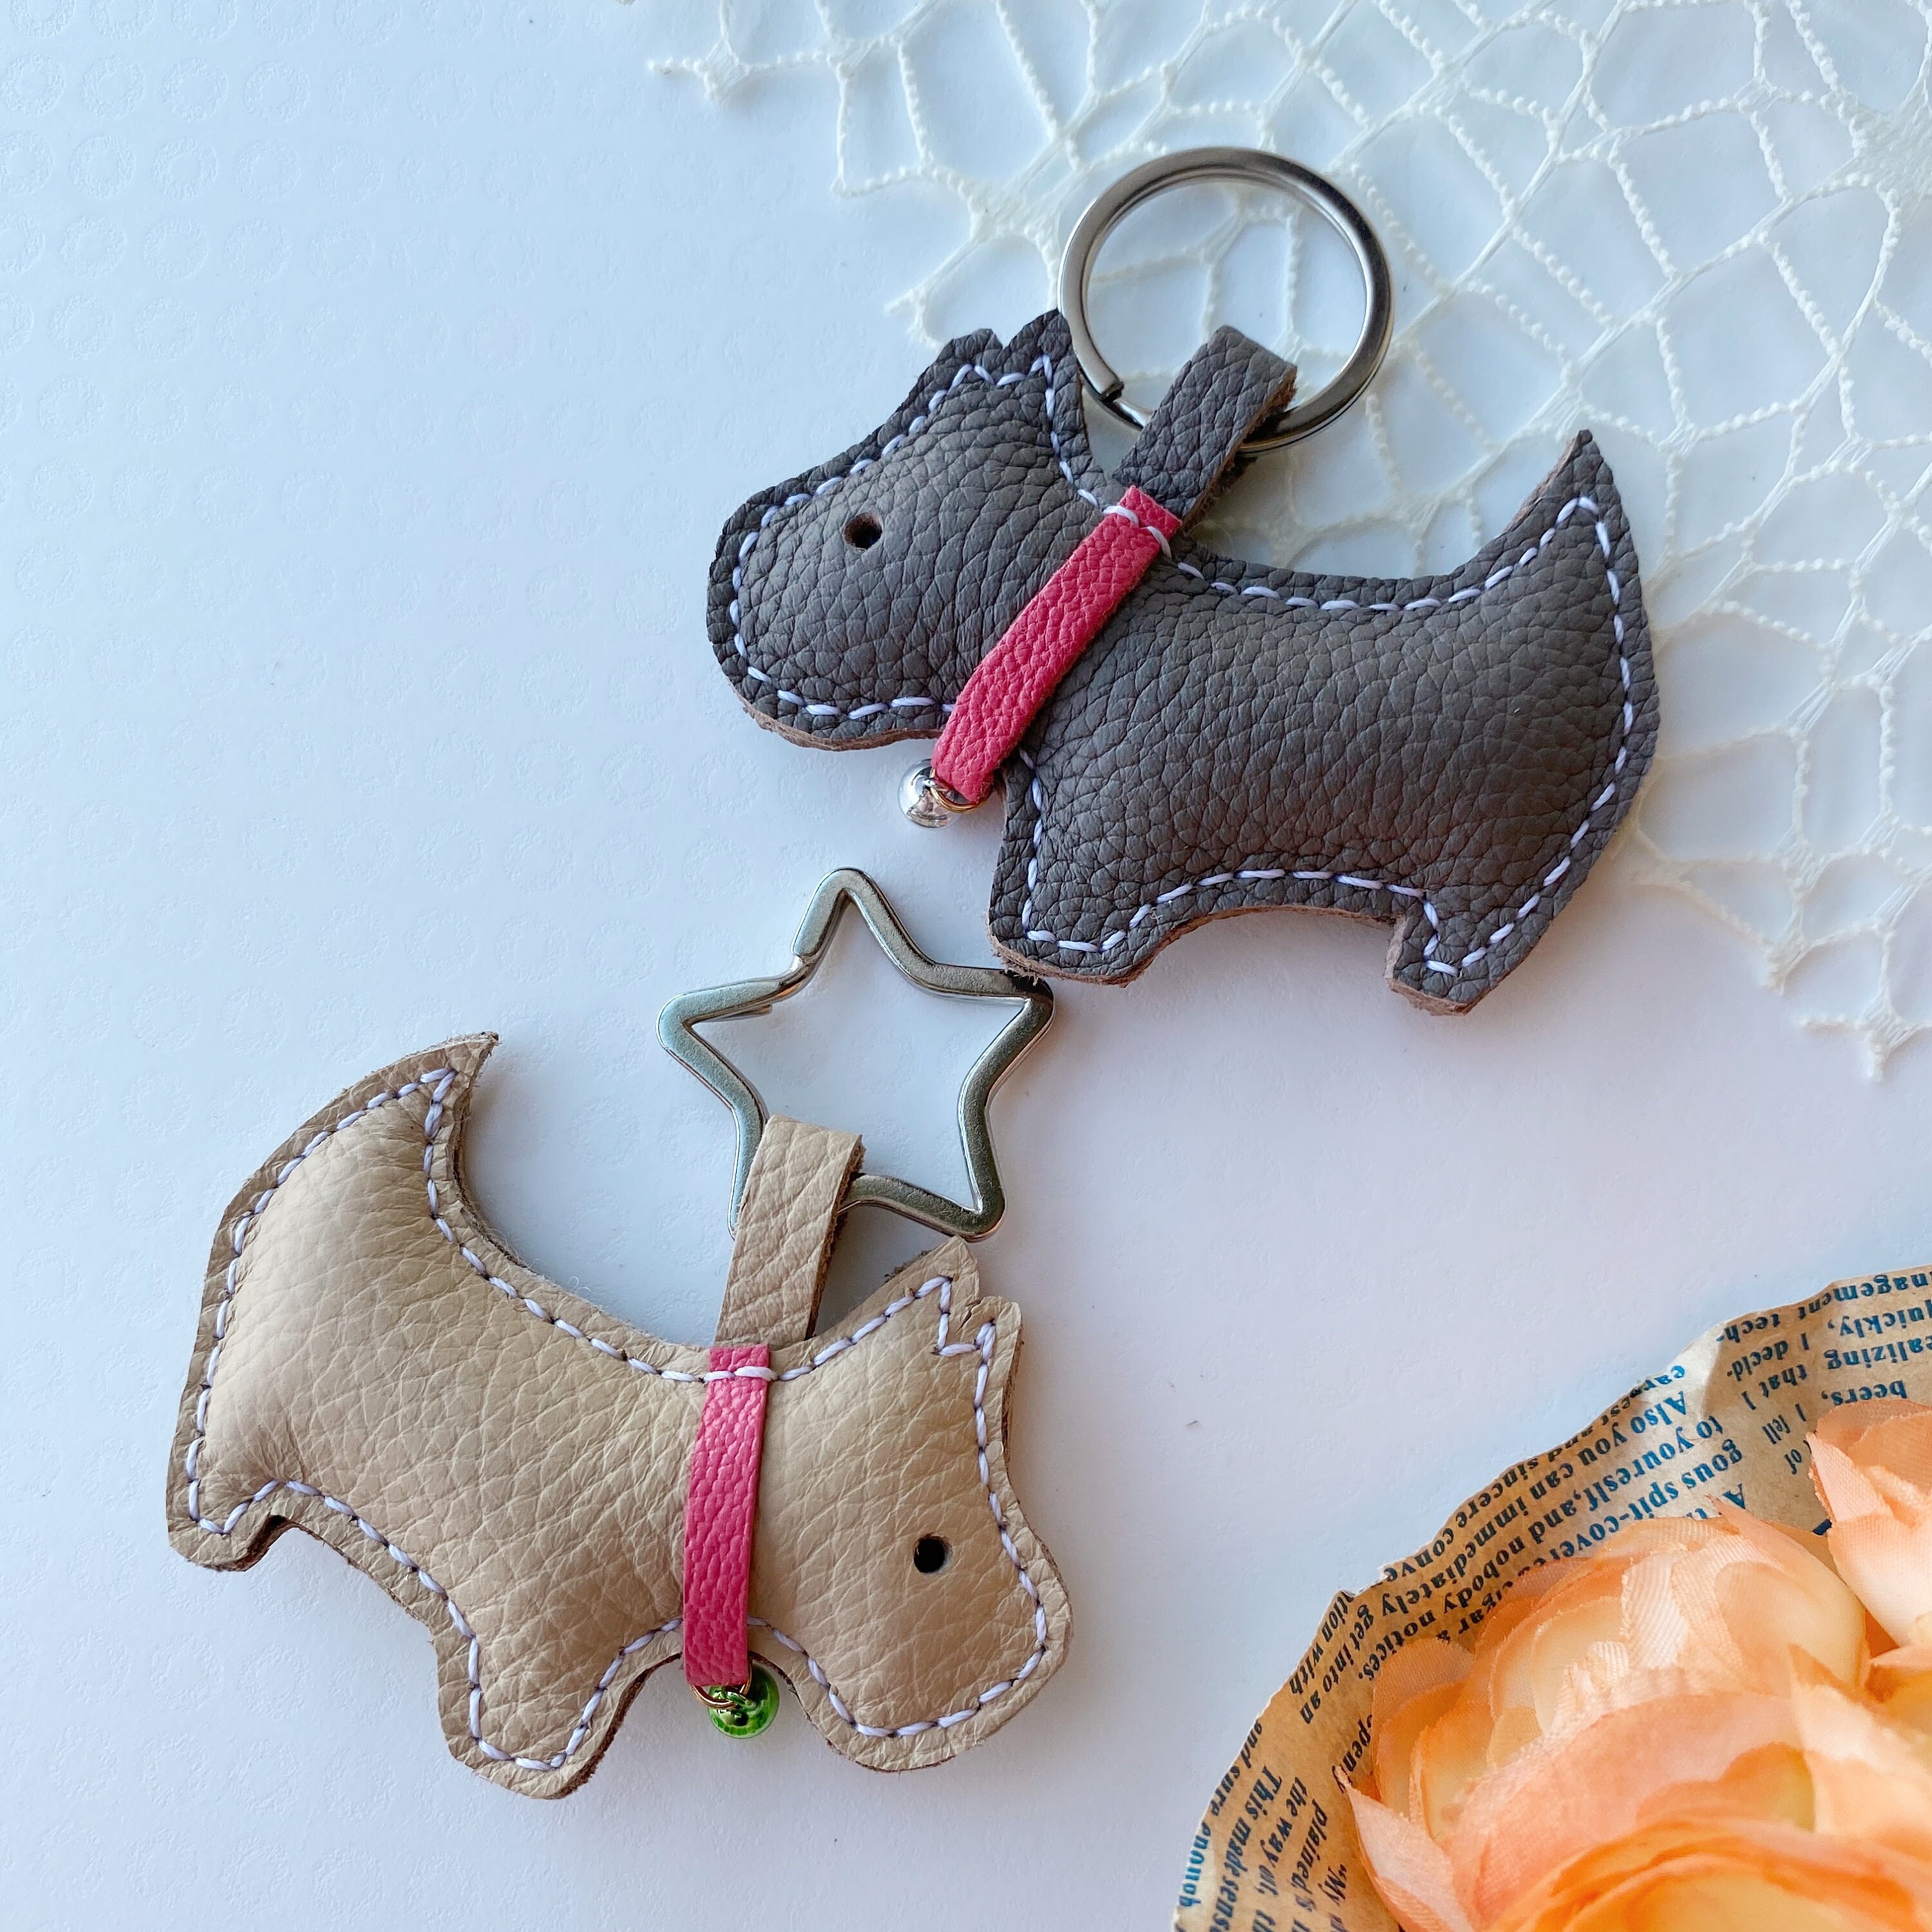 Buy Handmade Dog Leather Keychain / Bag Charm Online in India 